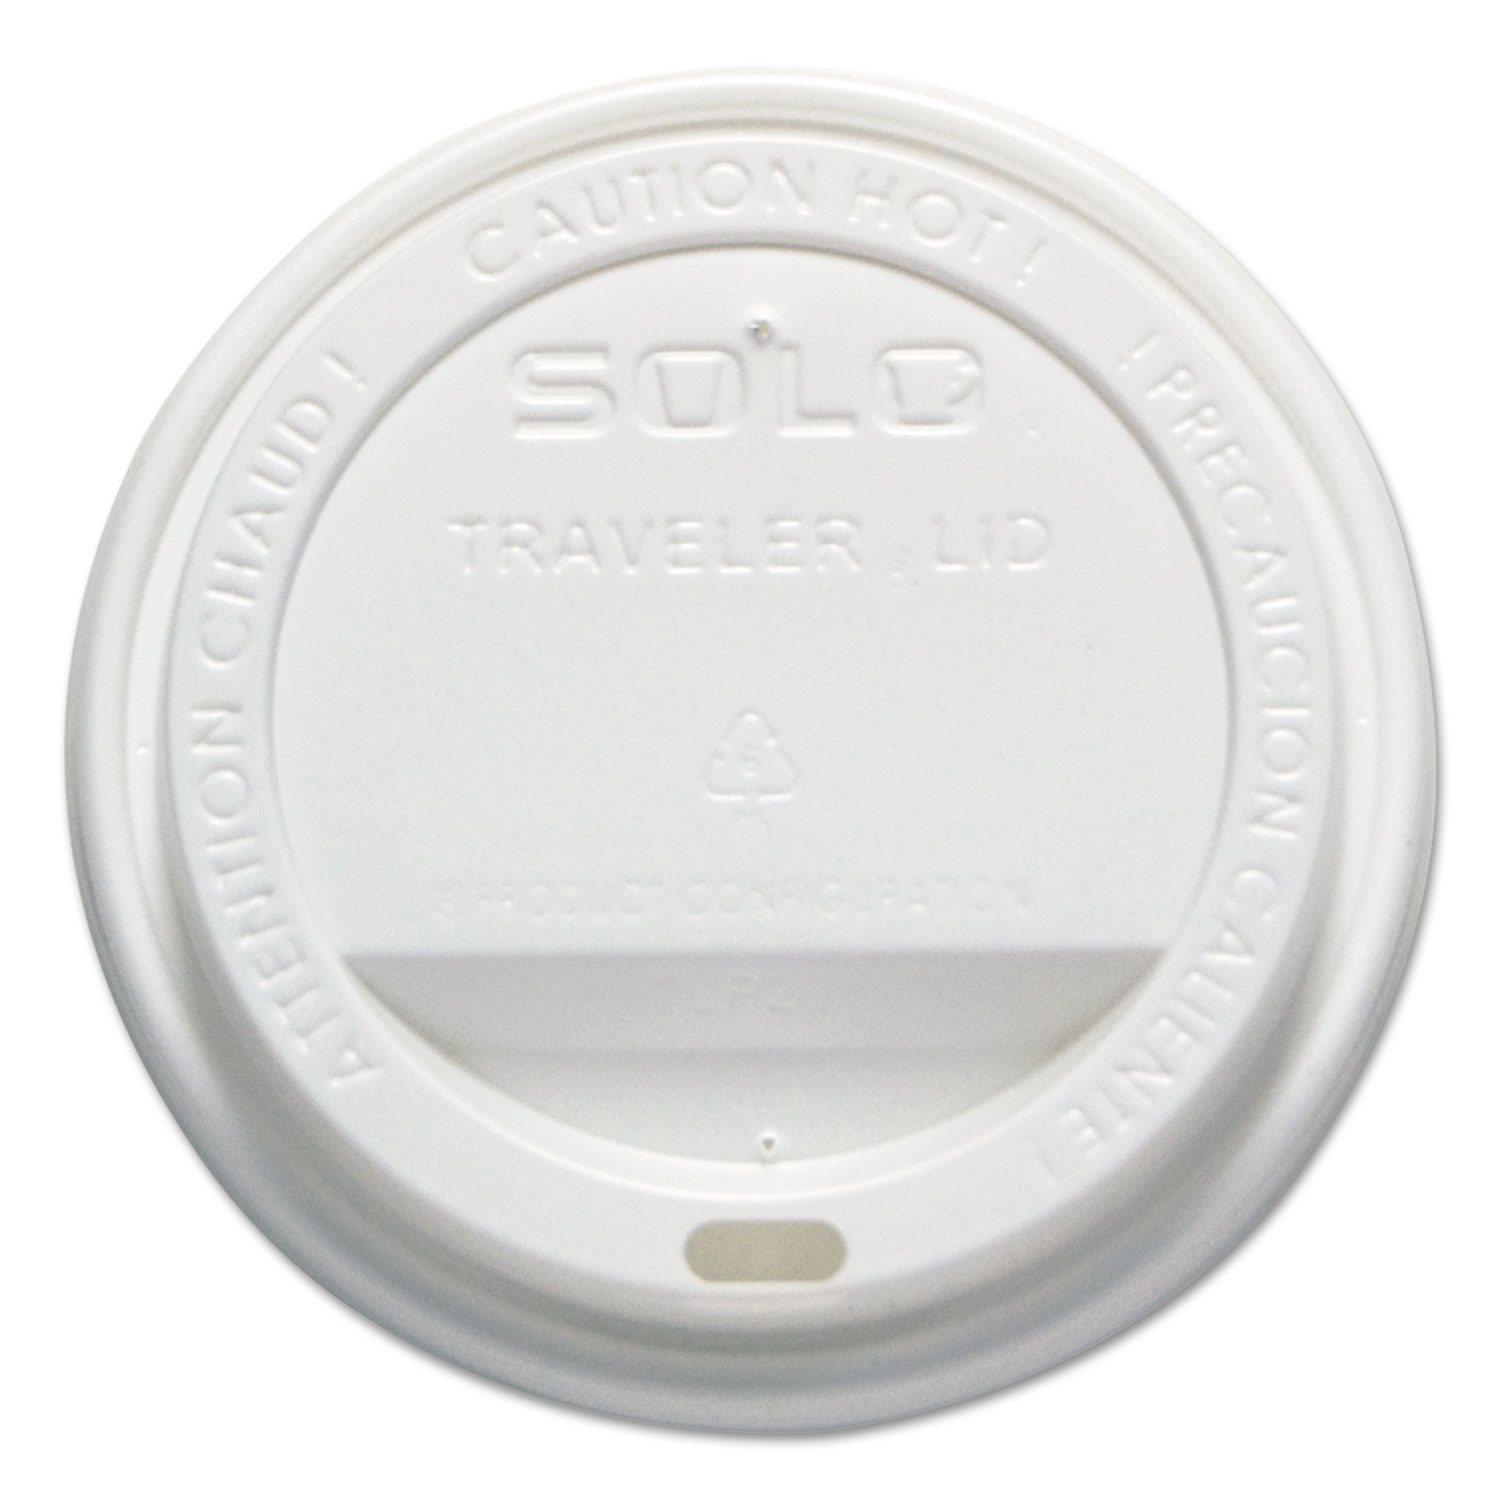  Dart OFTL16-0007 Traveler Cappuccino Style Dome Lid, 12-16oz Hot Cups, White, 50/Pack, 6 Packs/Carton (SCCOFTL160007) 